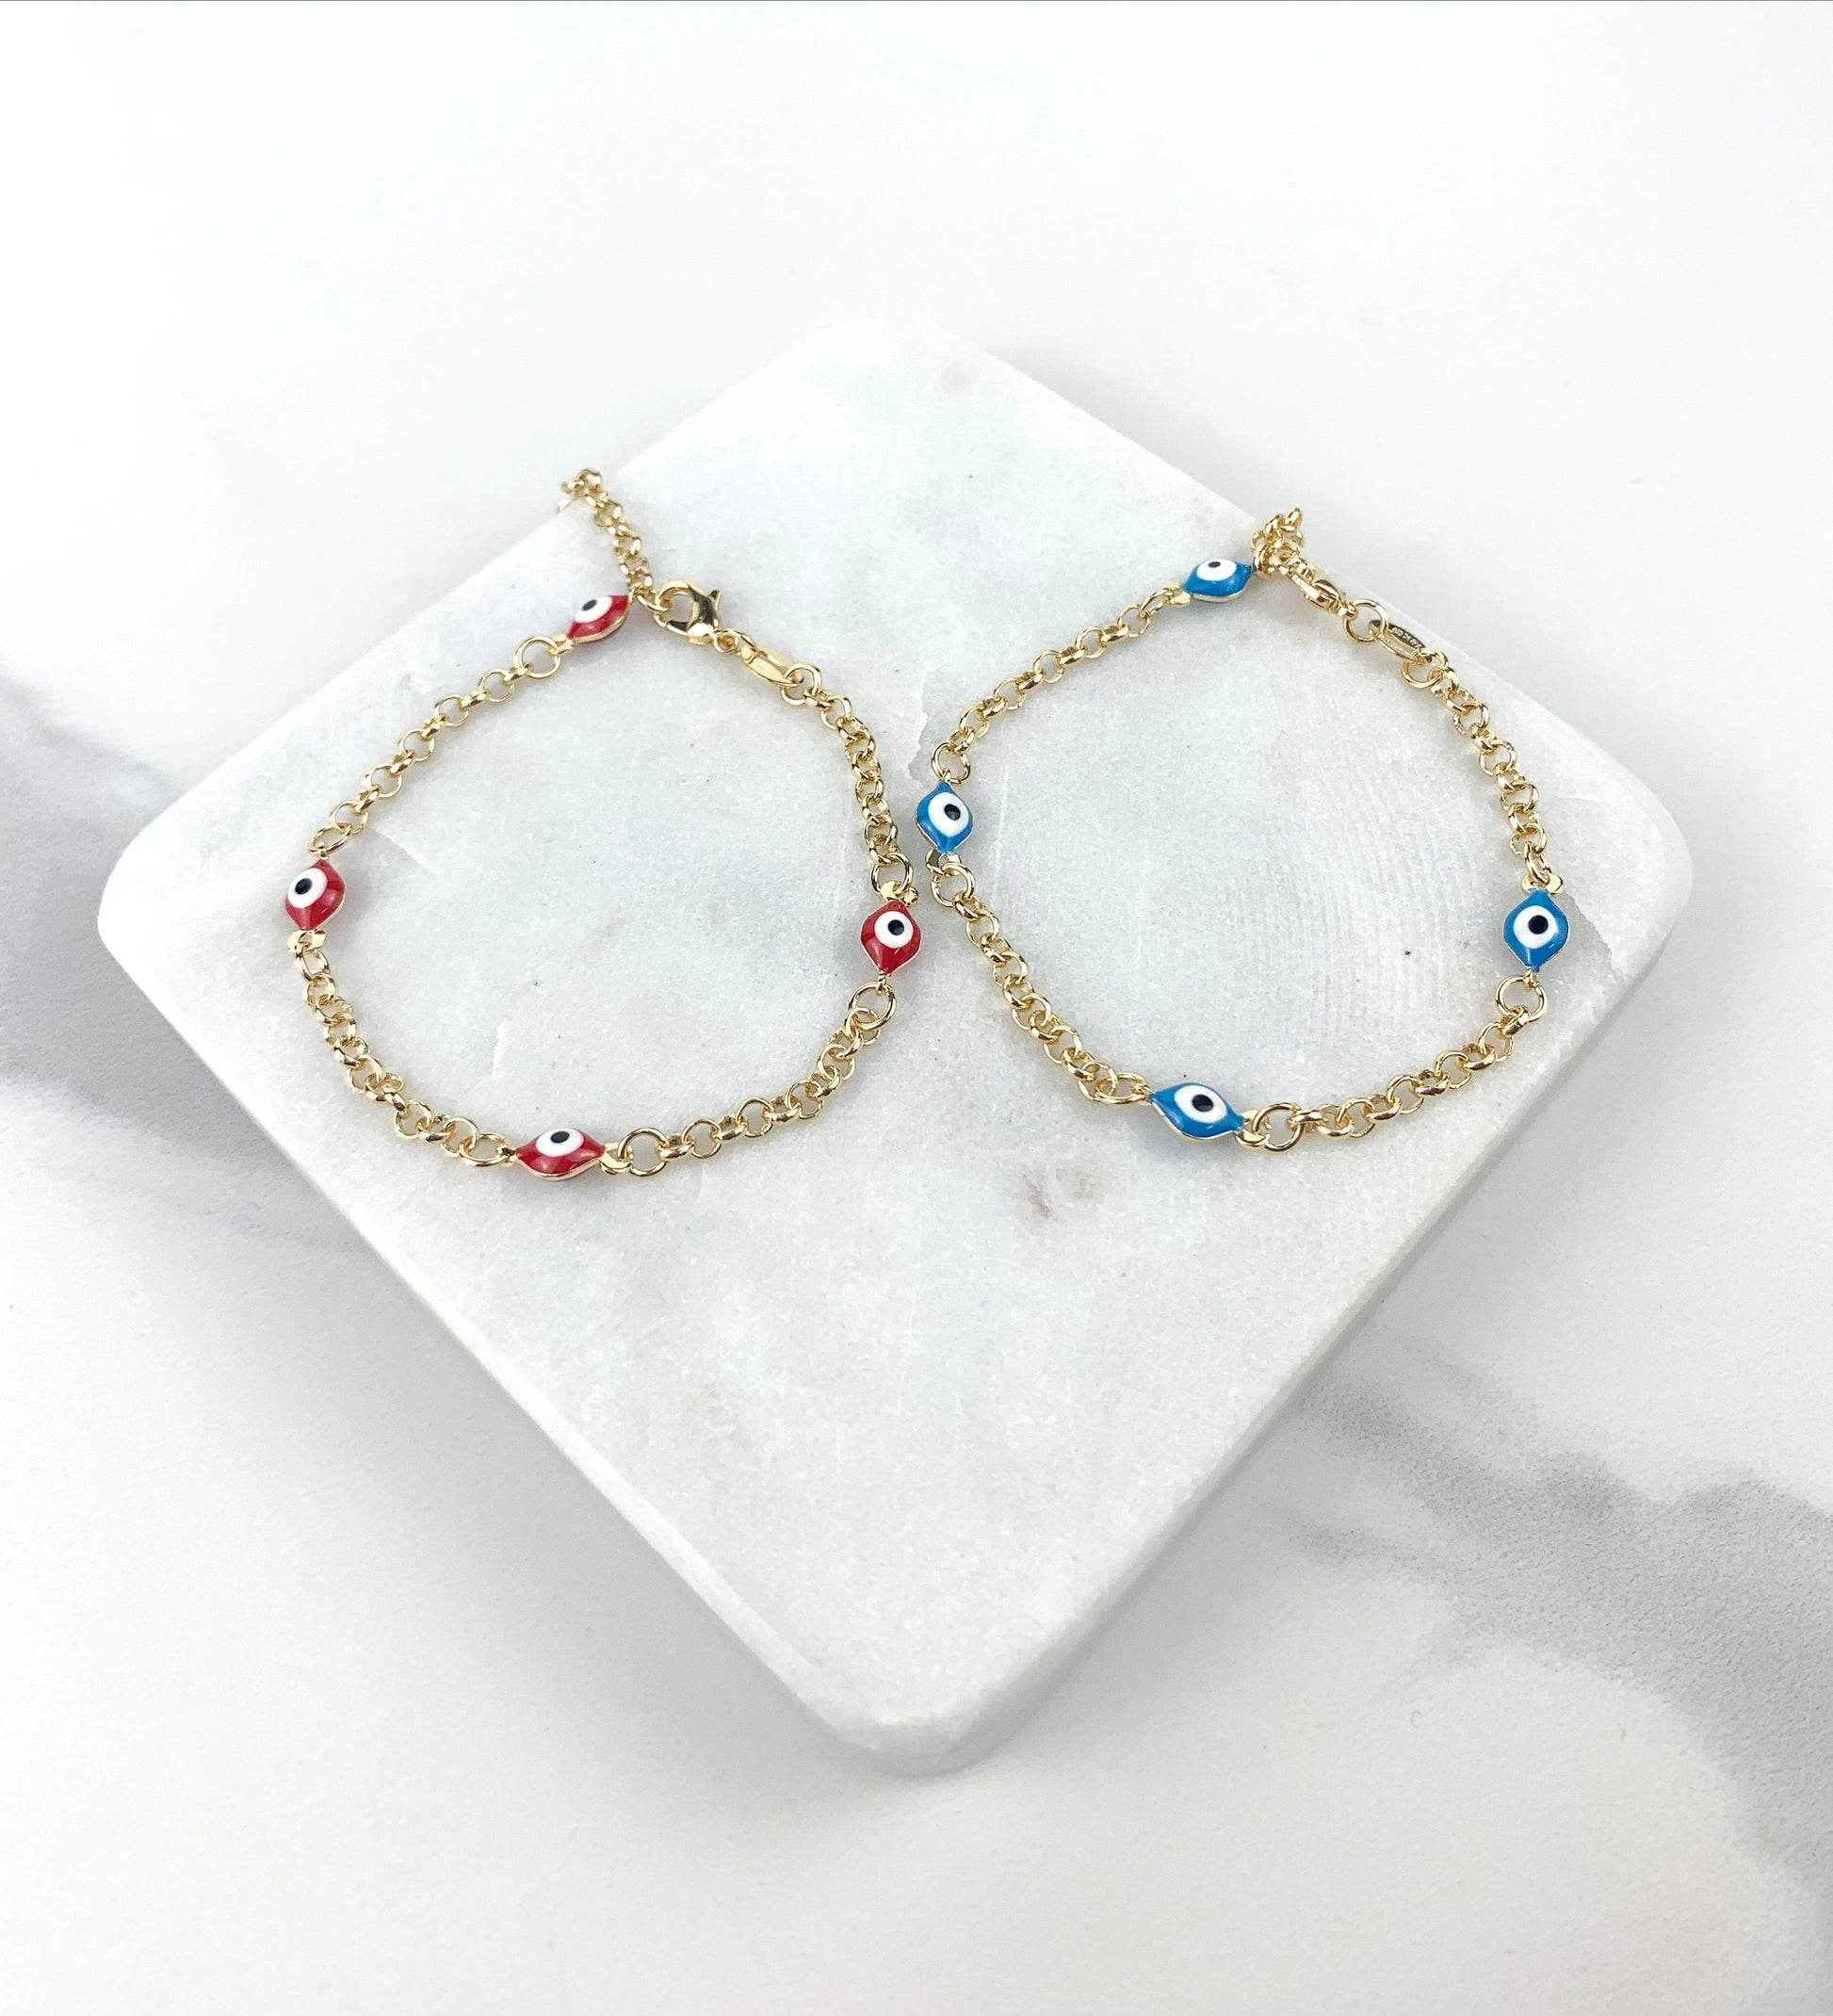 18k Gold Filled Curb Link Chain with Evil Eye Charms Red or Blue, Linked Lucky & Protection Bracelet Wholesale Jewelry Making Supplies